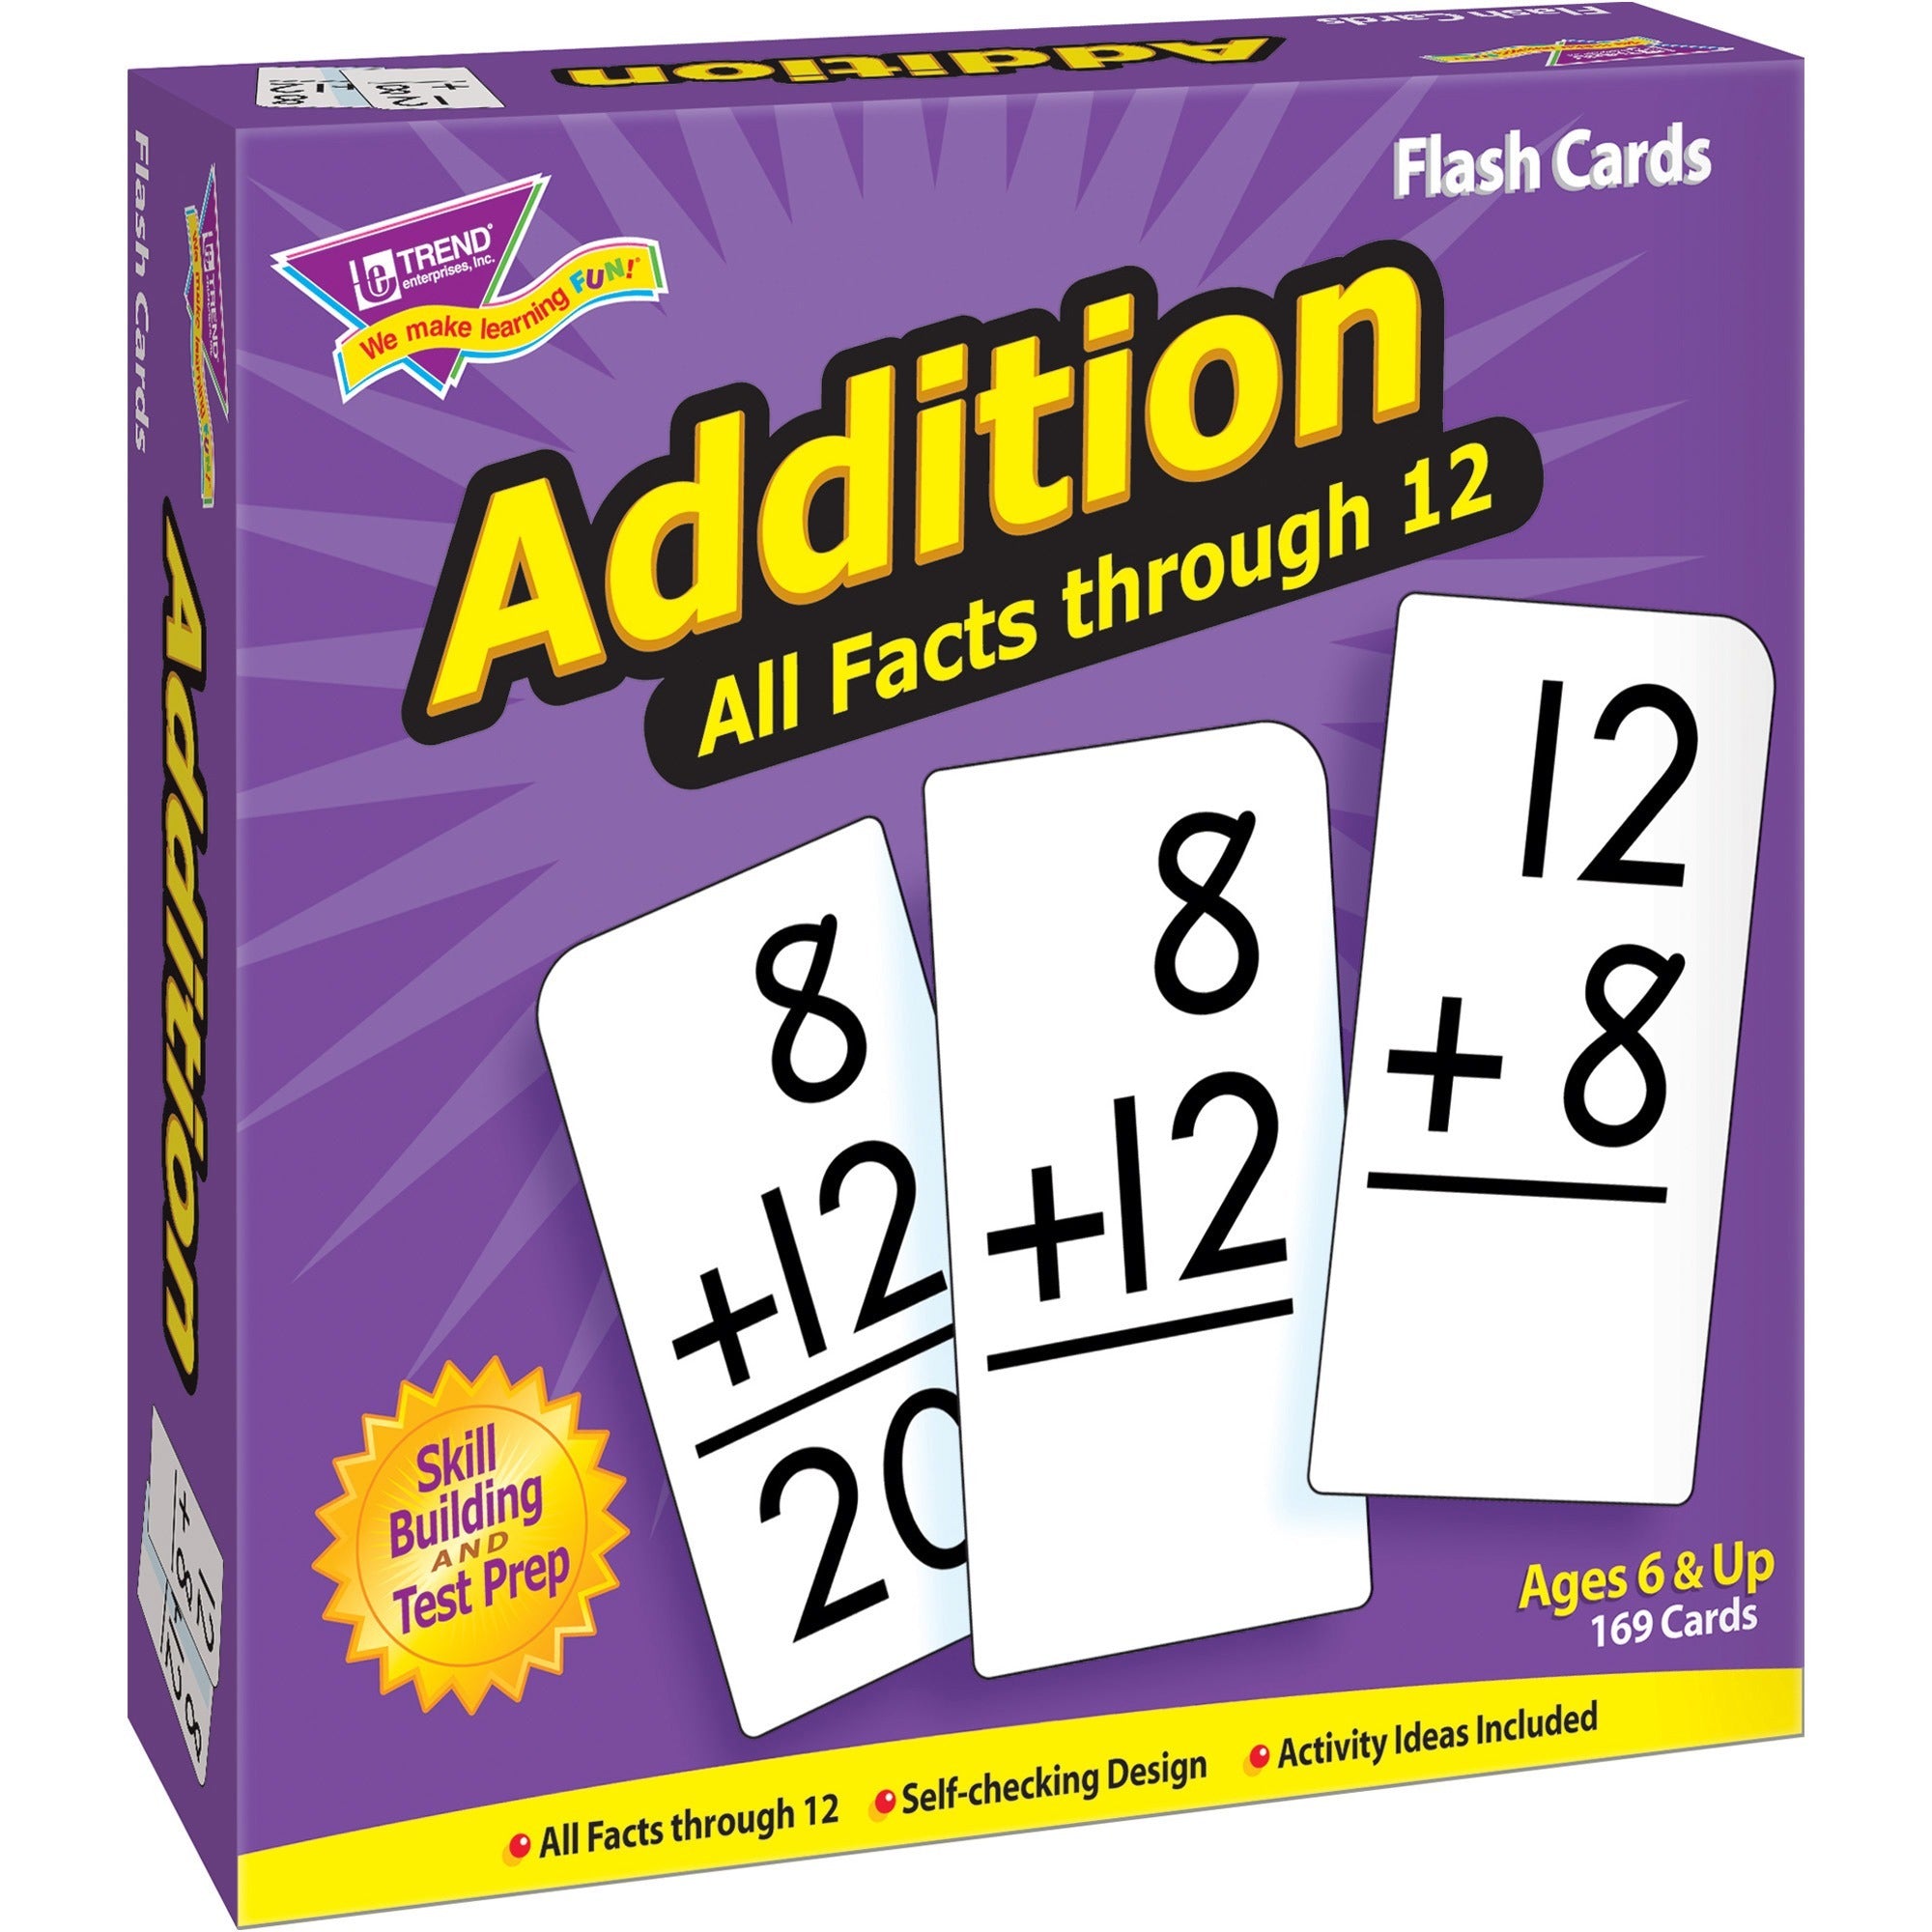 trend-addition-all-facts-through-12-flash-cards-theme-subject-learning-skill-learning-addition-169-pieces-6+-169-box_tep53201 - 1